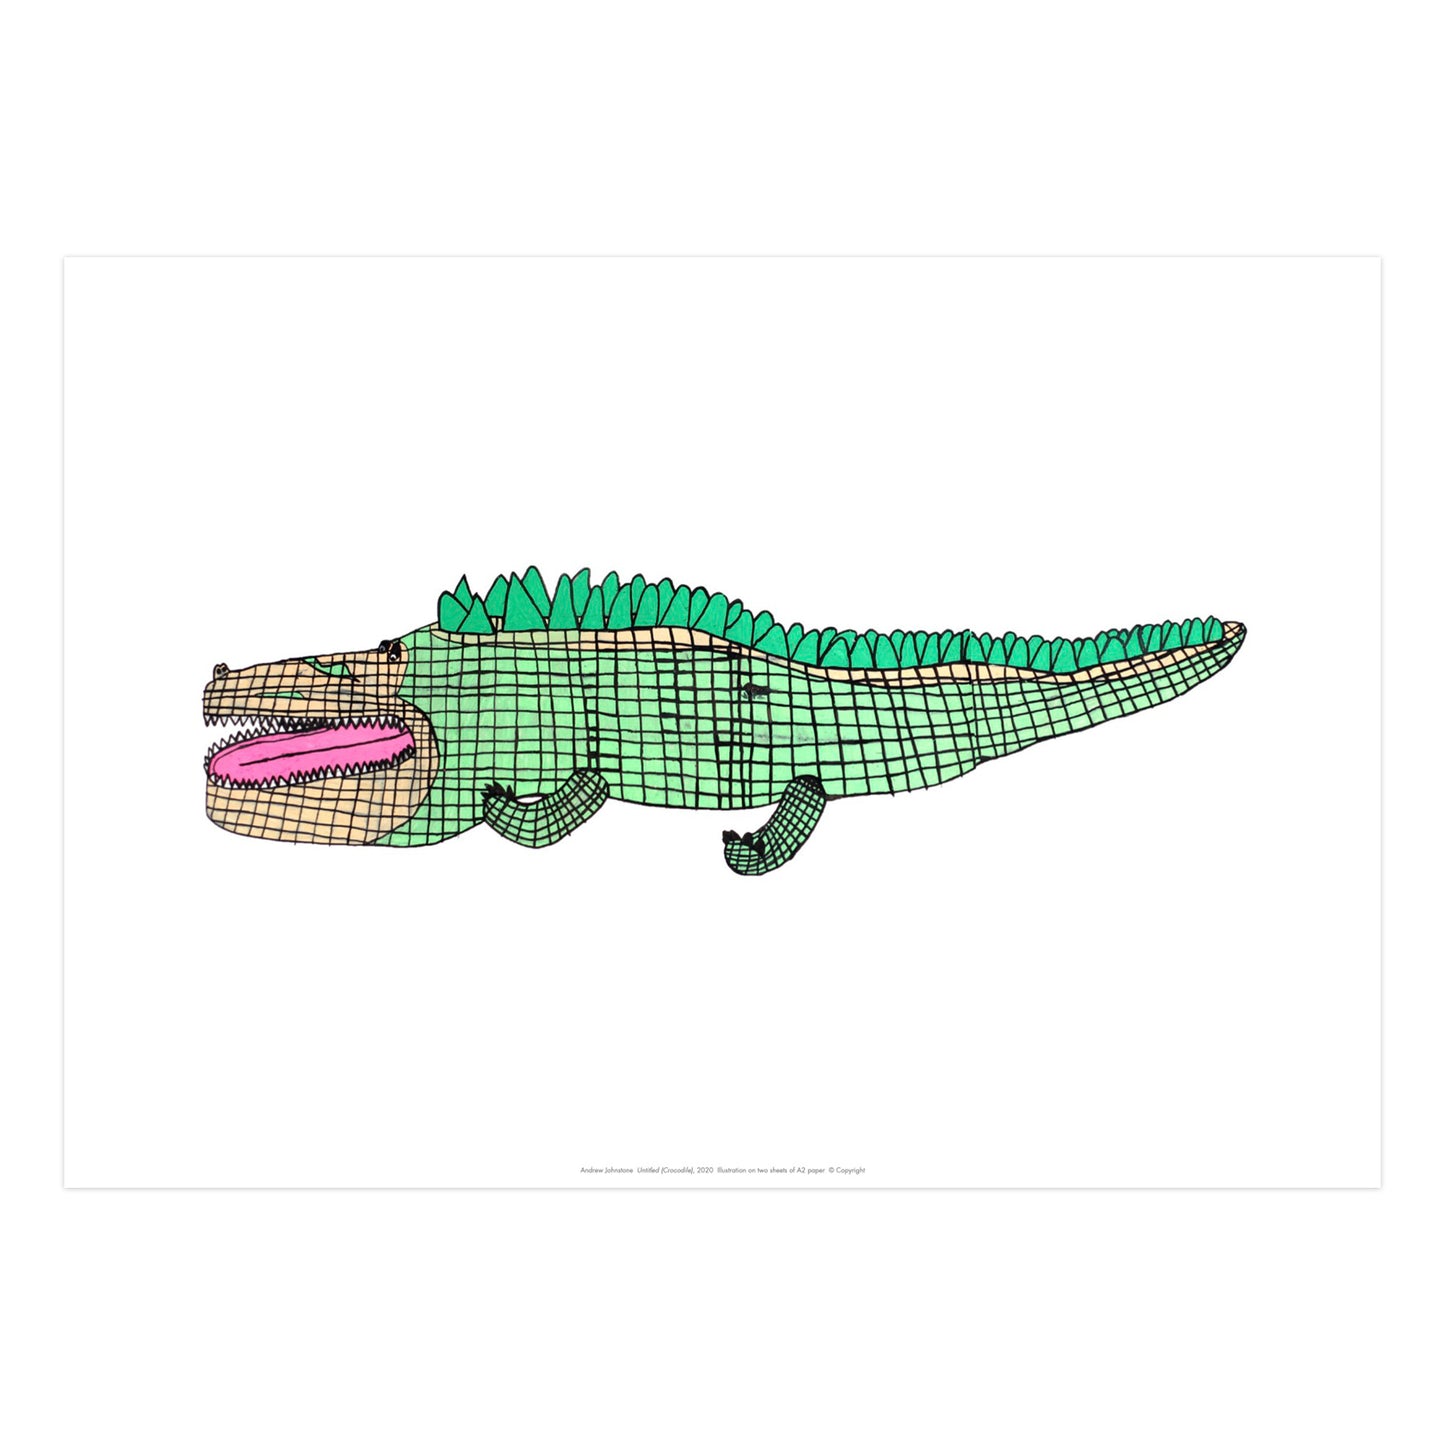 Reproduction of Andrew Johnston limited edition crocodile artwork